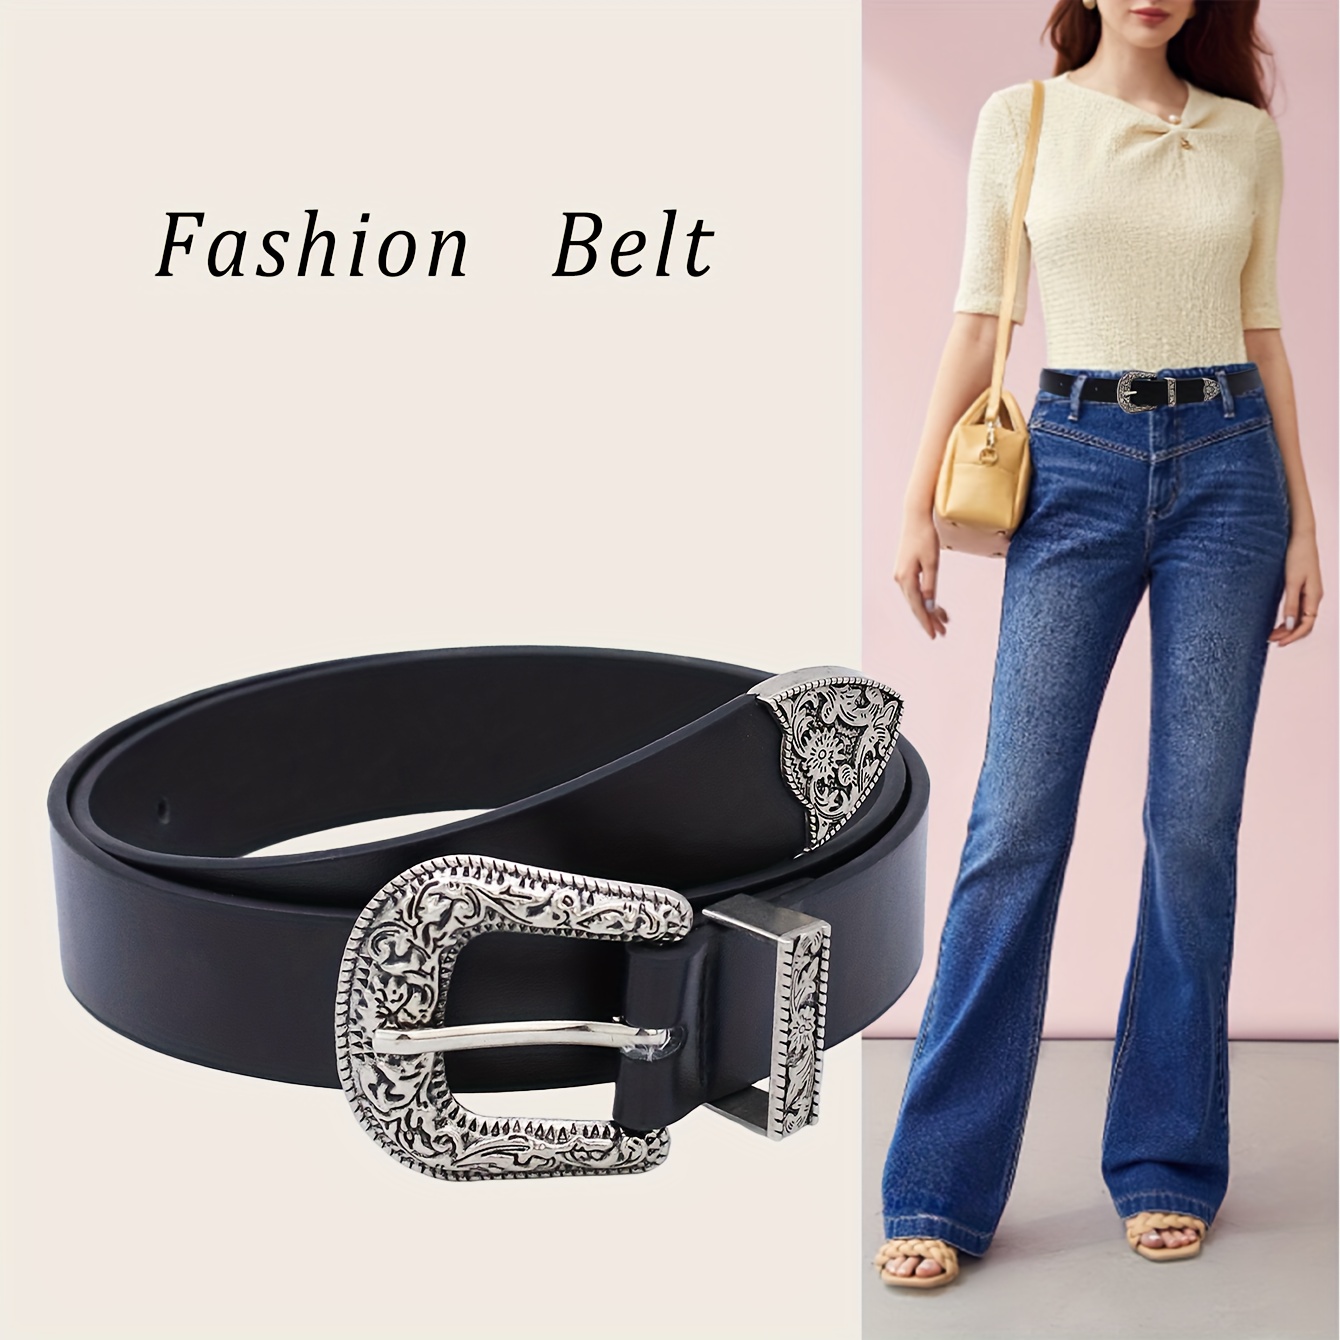 

1pc Vintage Embossed Pin Buckle Casual Pu Belt For Jeans And Sweaters, Retro Style Fashion Accessory